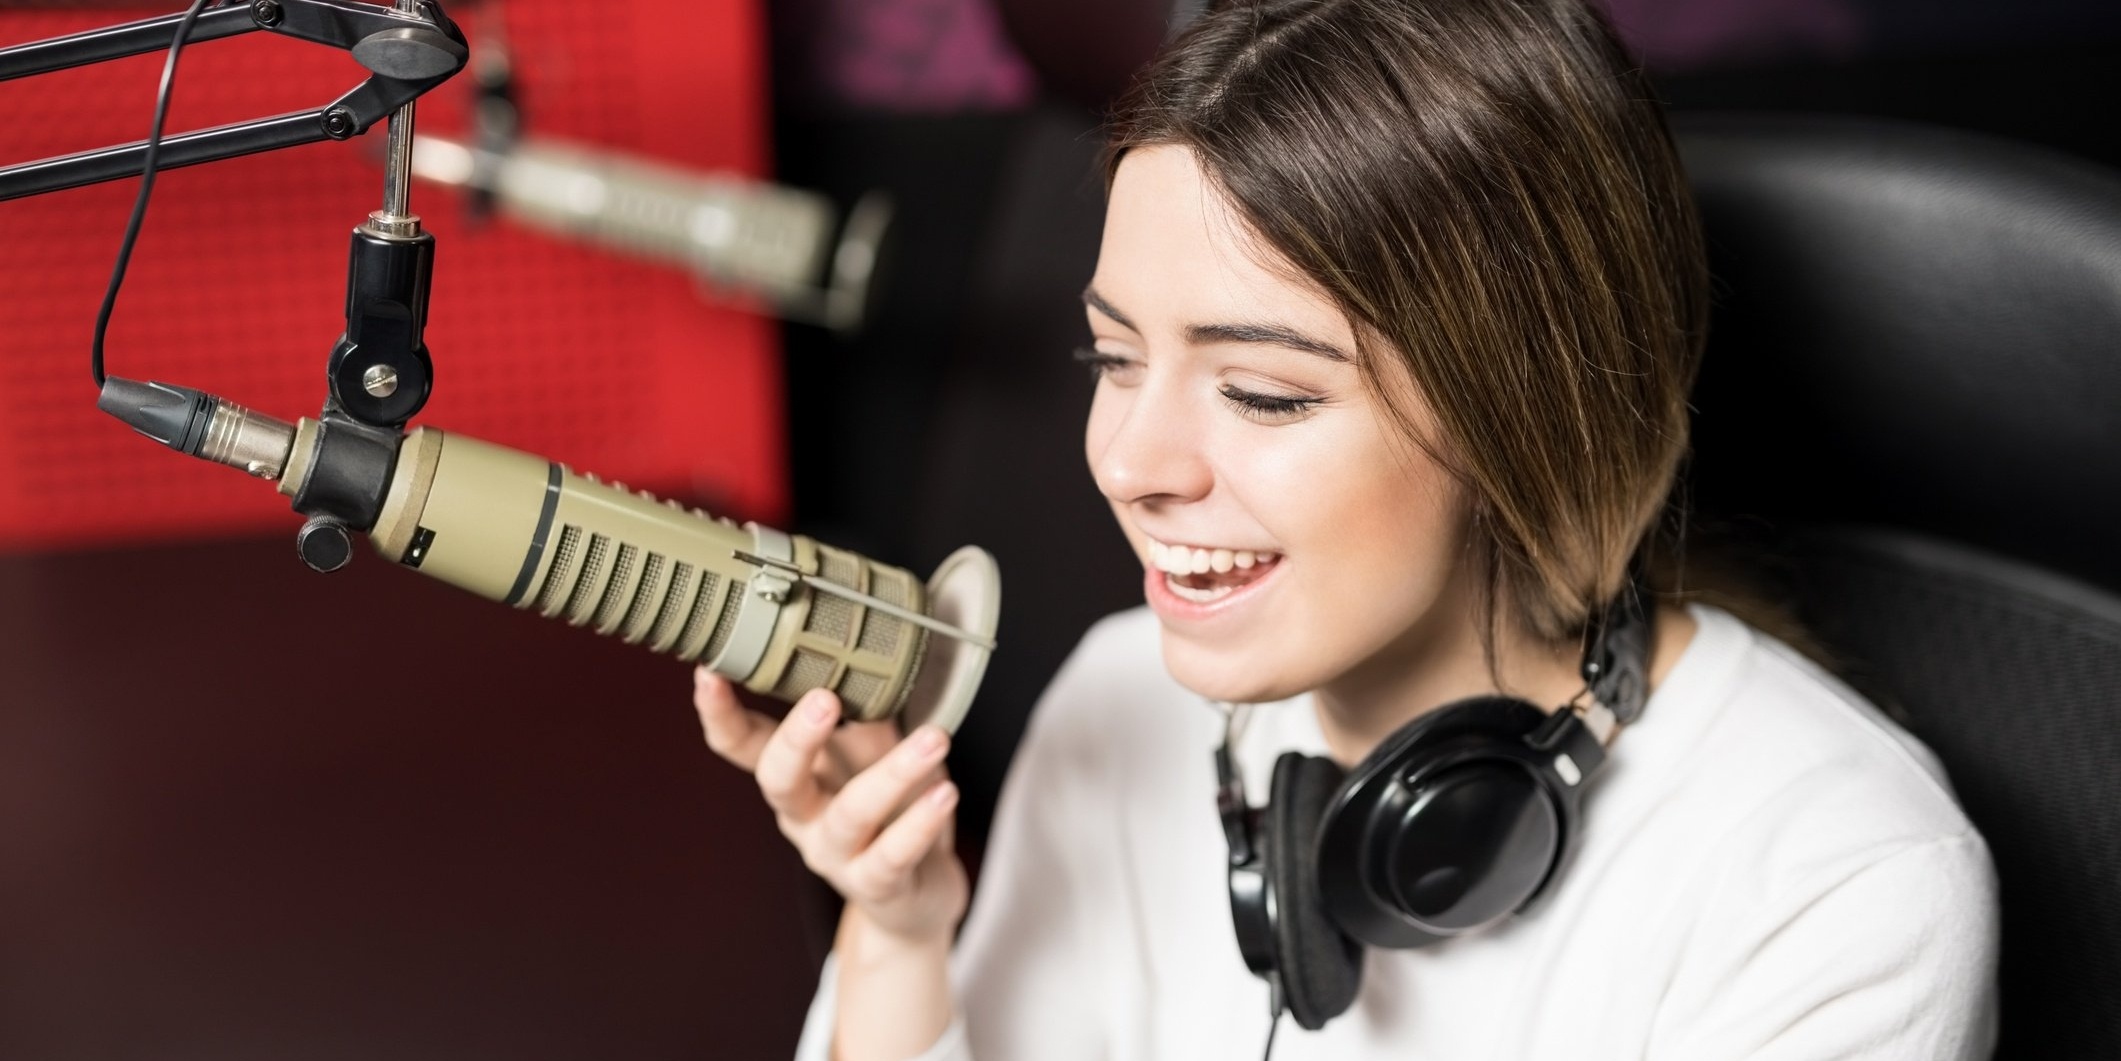 Radio gives advertisers power of personality